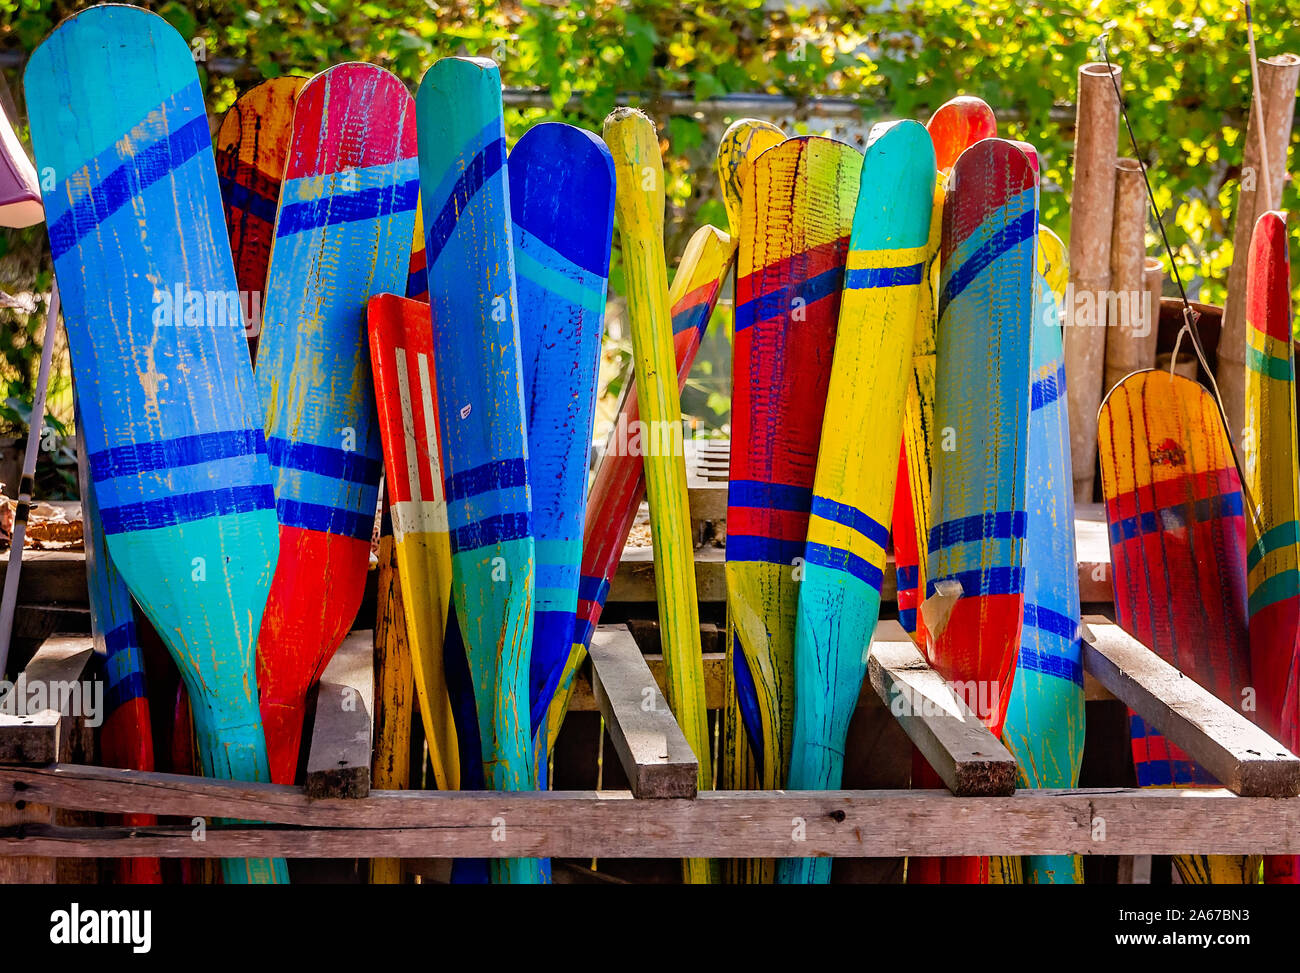 Wooden canoe paddles are displayed, Oct. 6, 2019, in Apalachicola, Florida. Stock Photo